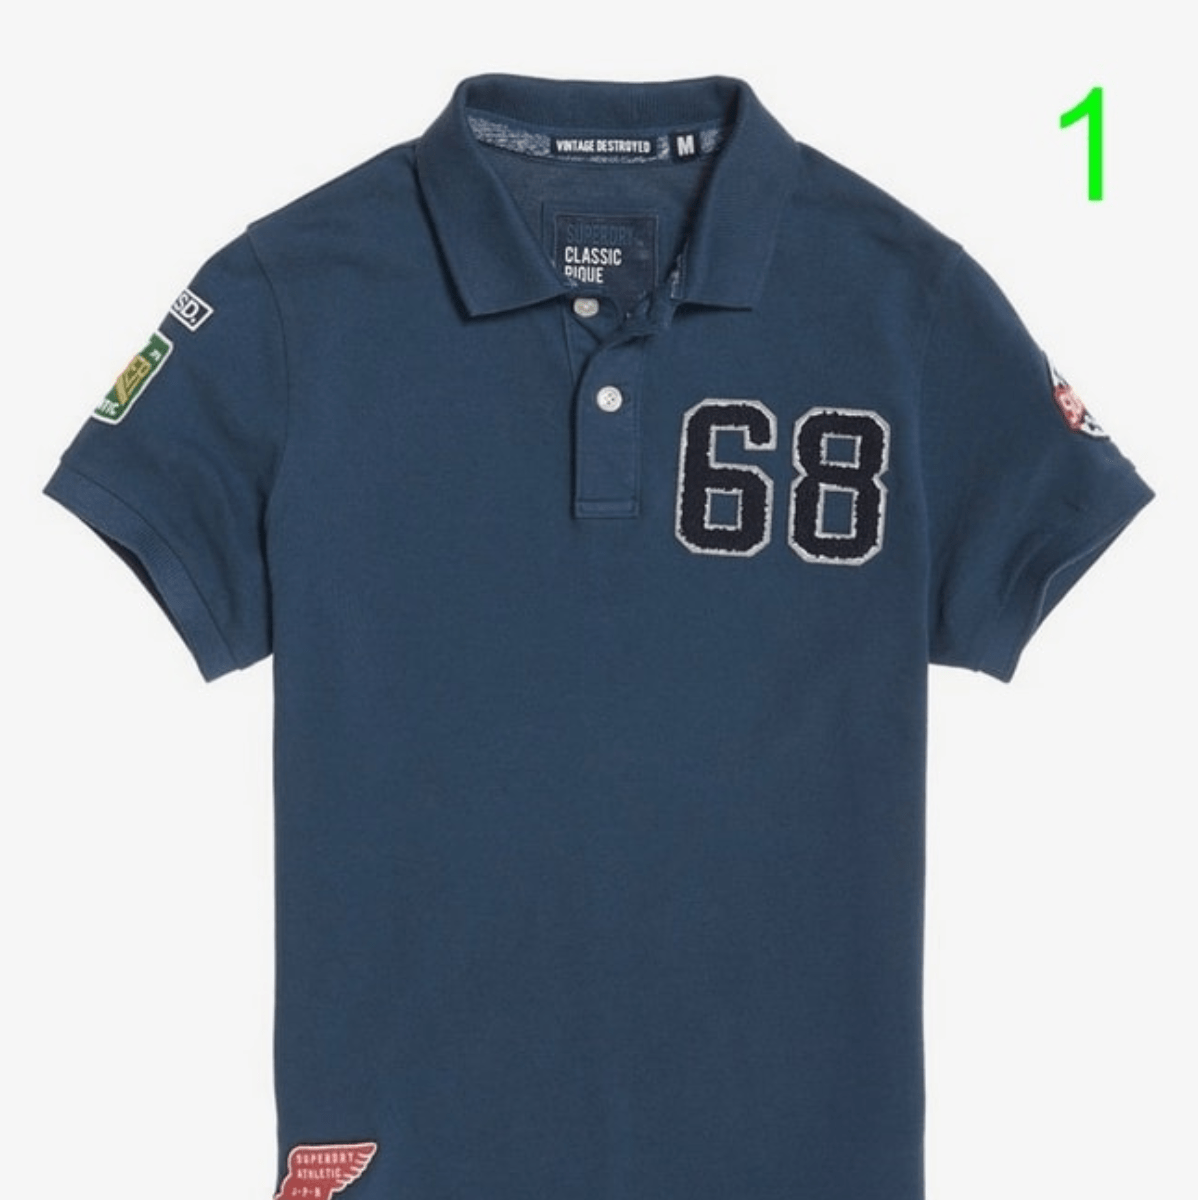 4 2 - Superdry Official Summer 2 Polo Pack